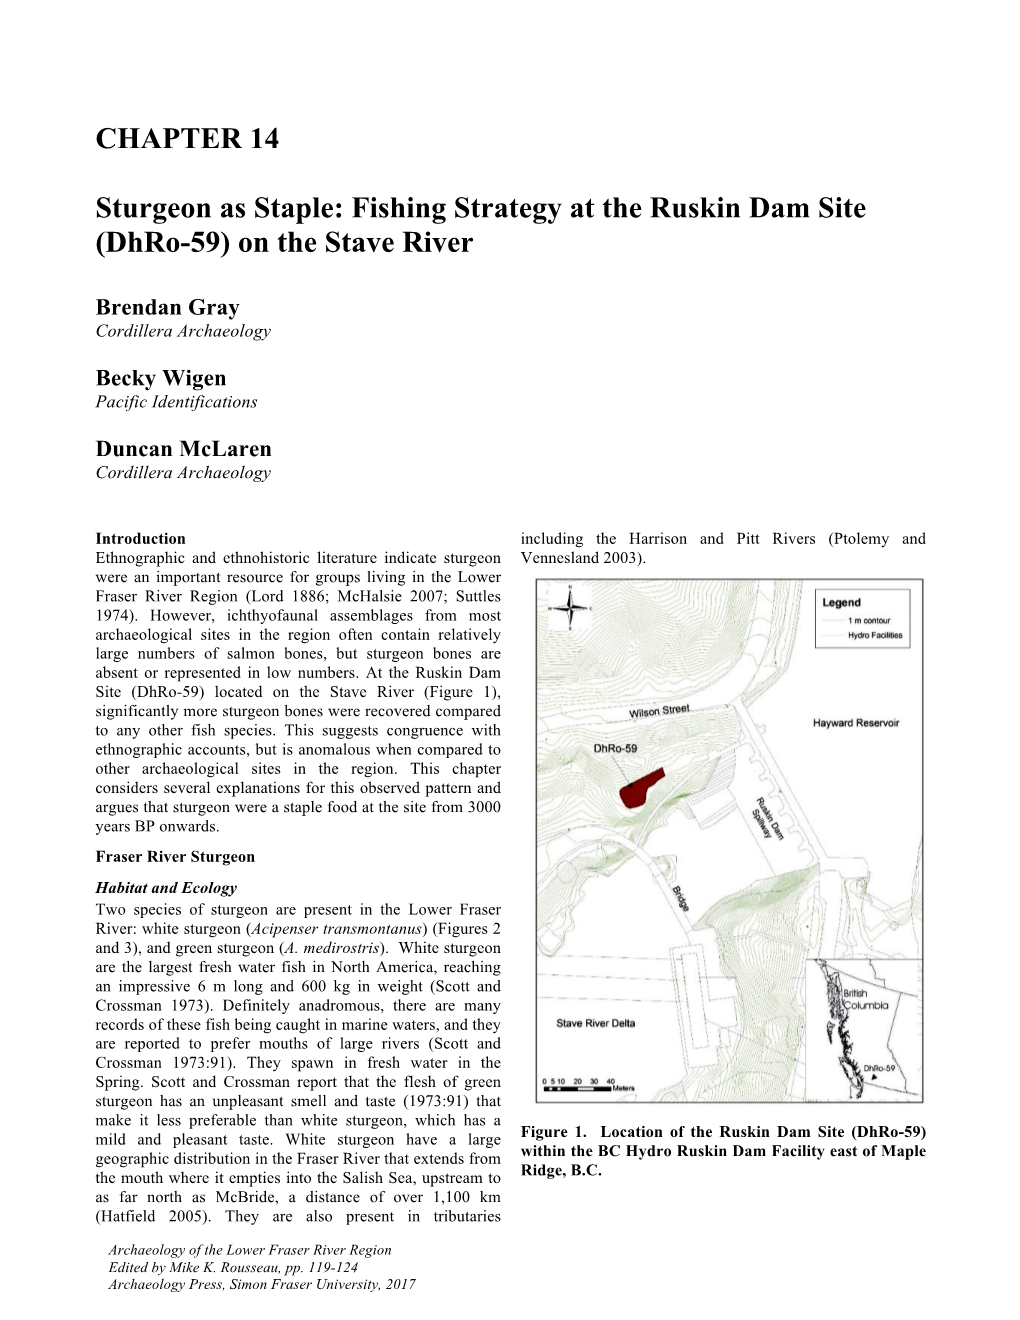 Fishing Strategy at the Ruskin Dam Site (Dhro-59) on the Stave River